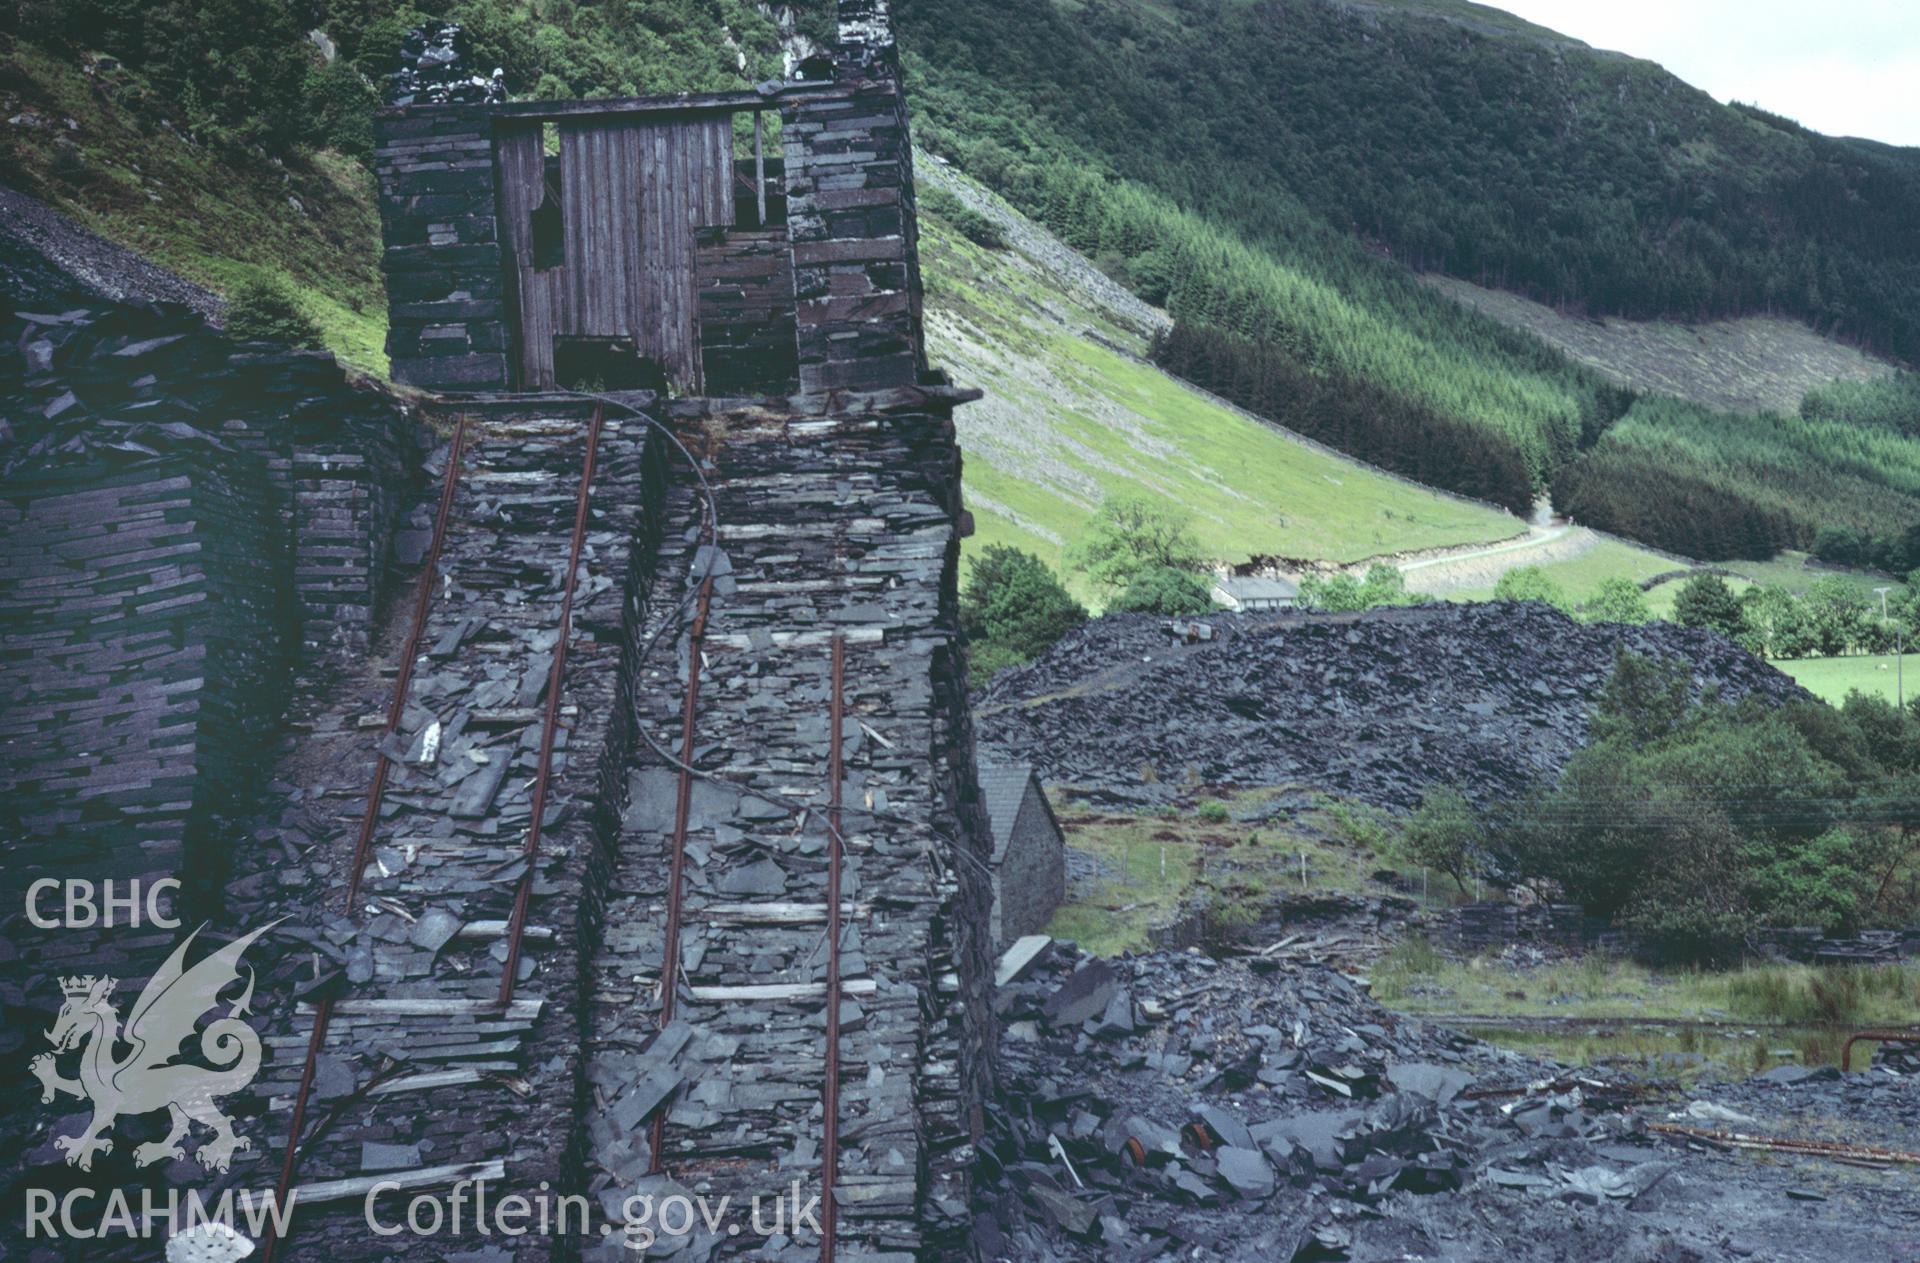 35mm colour slide showing Aberllefenni Slate Quarry, Merionethshire by Dylan Roberts, undated.